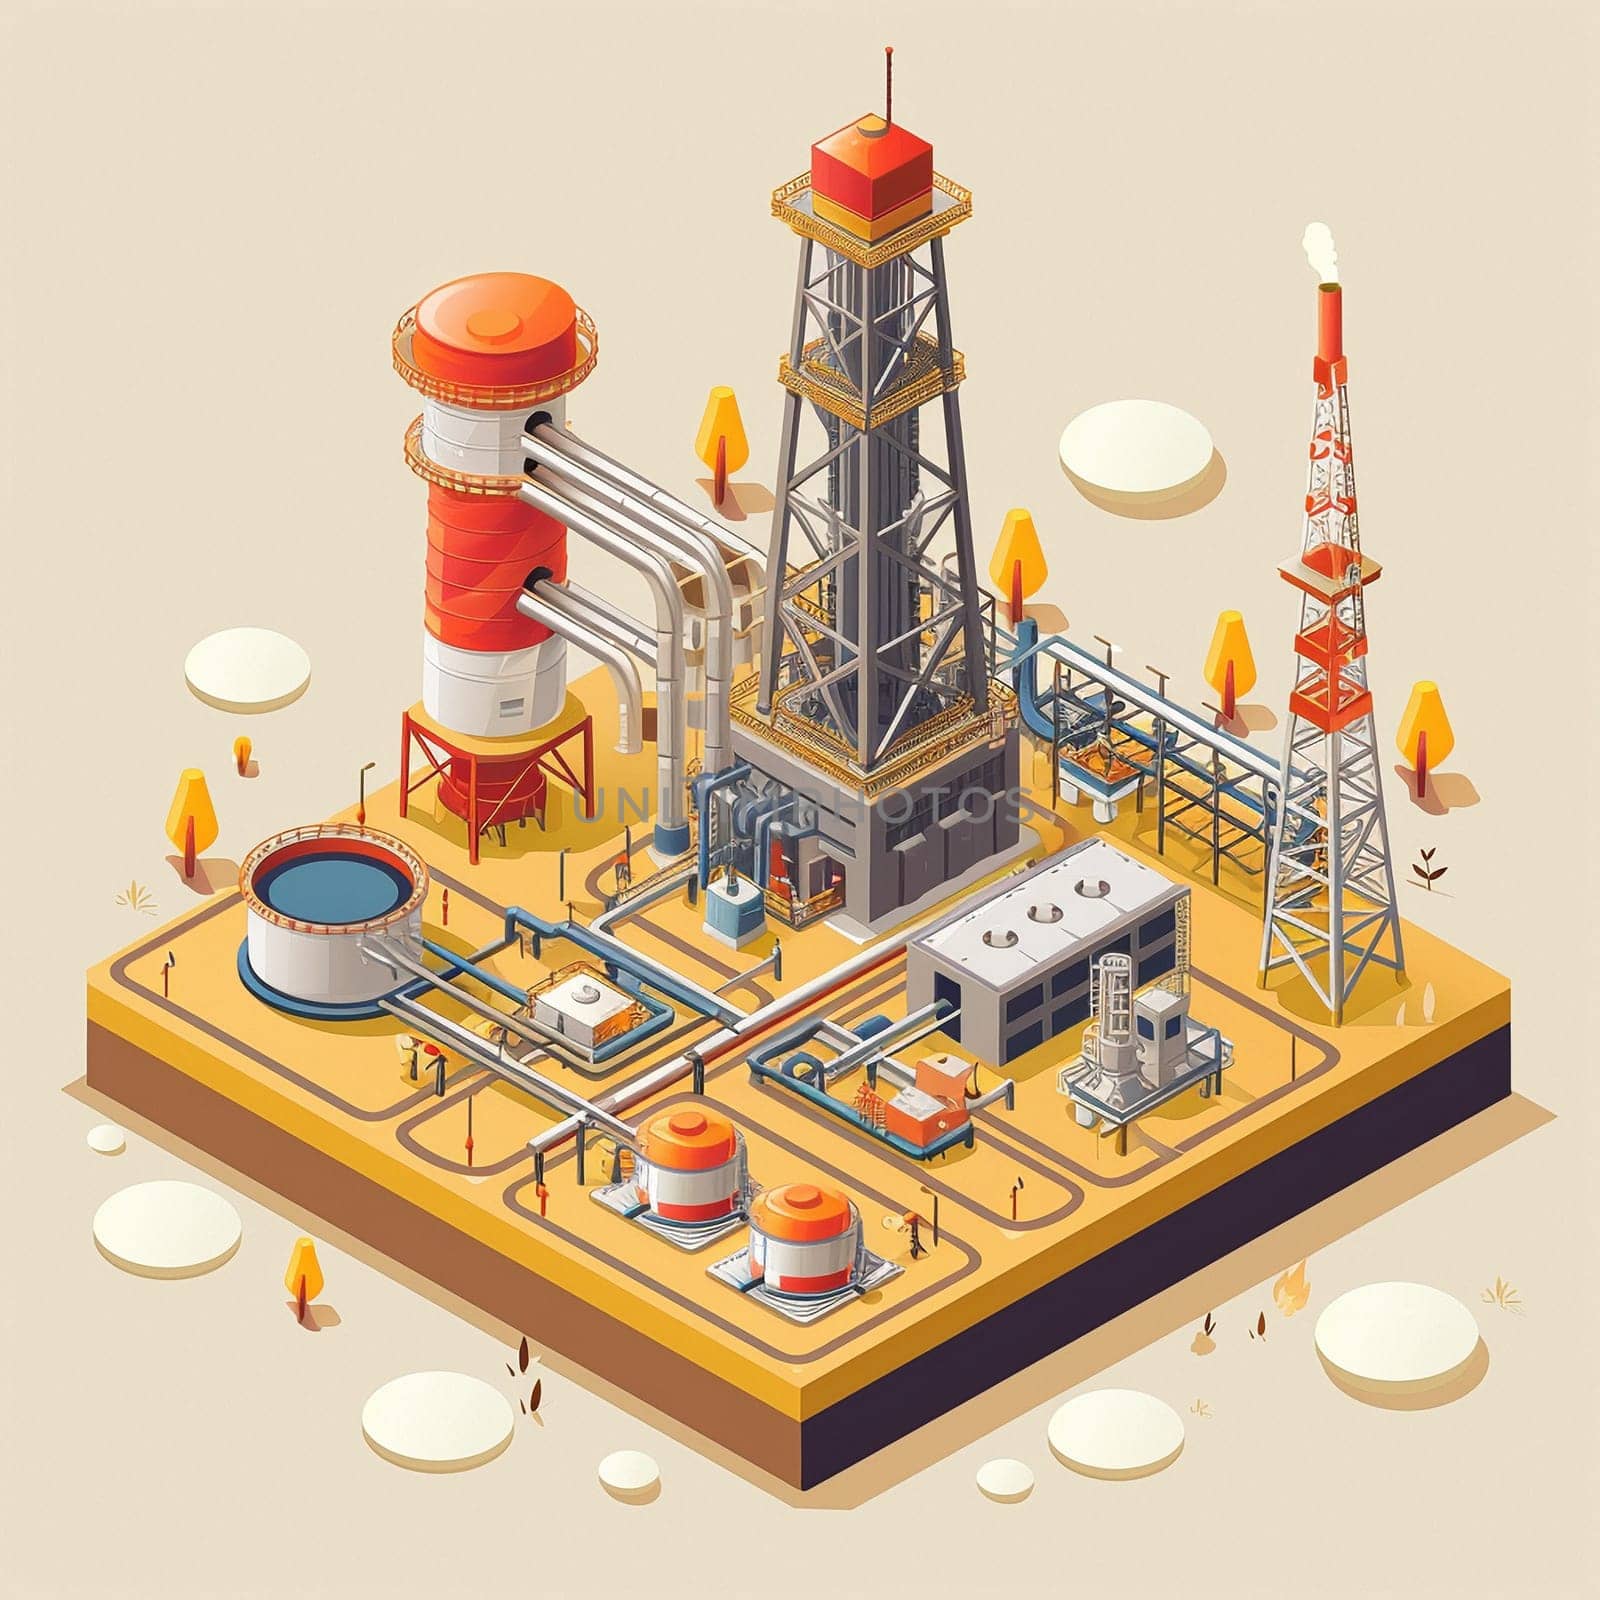 project teamwork in the field of oil production. isometric illustration by NeuroSky